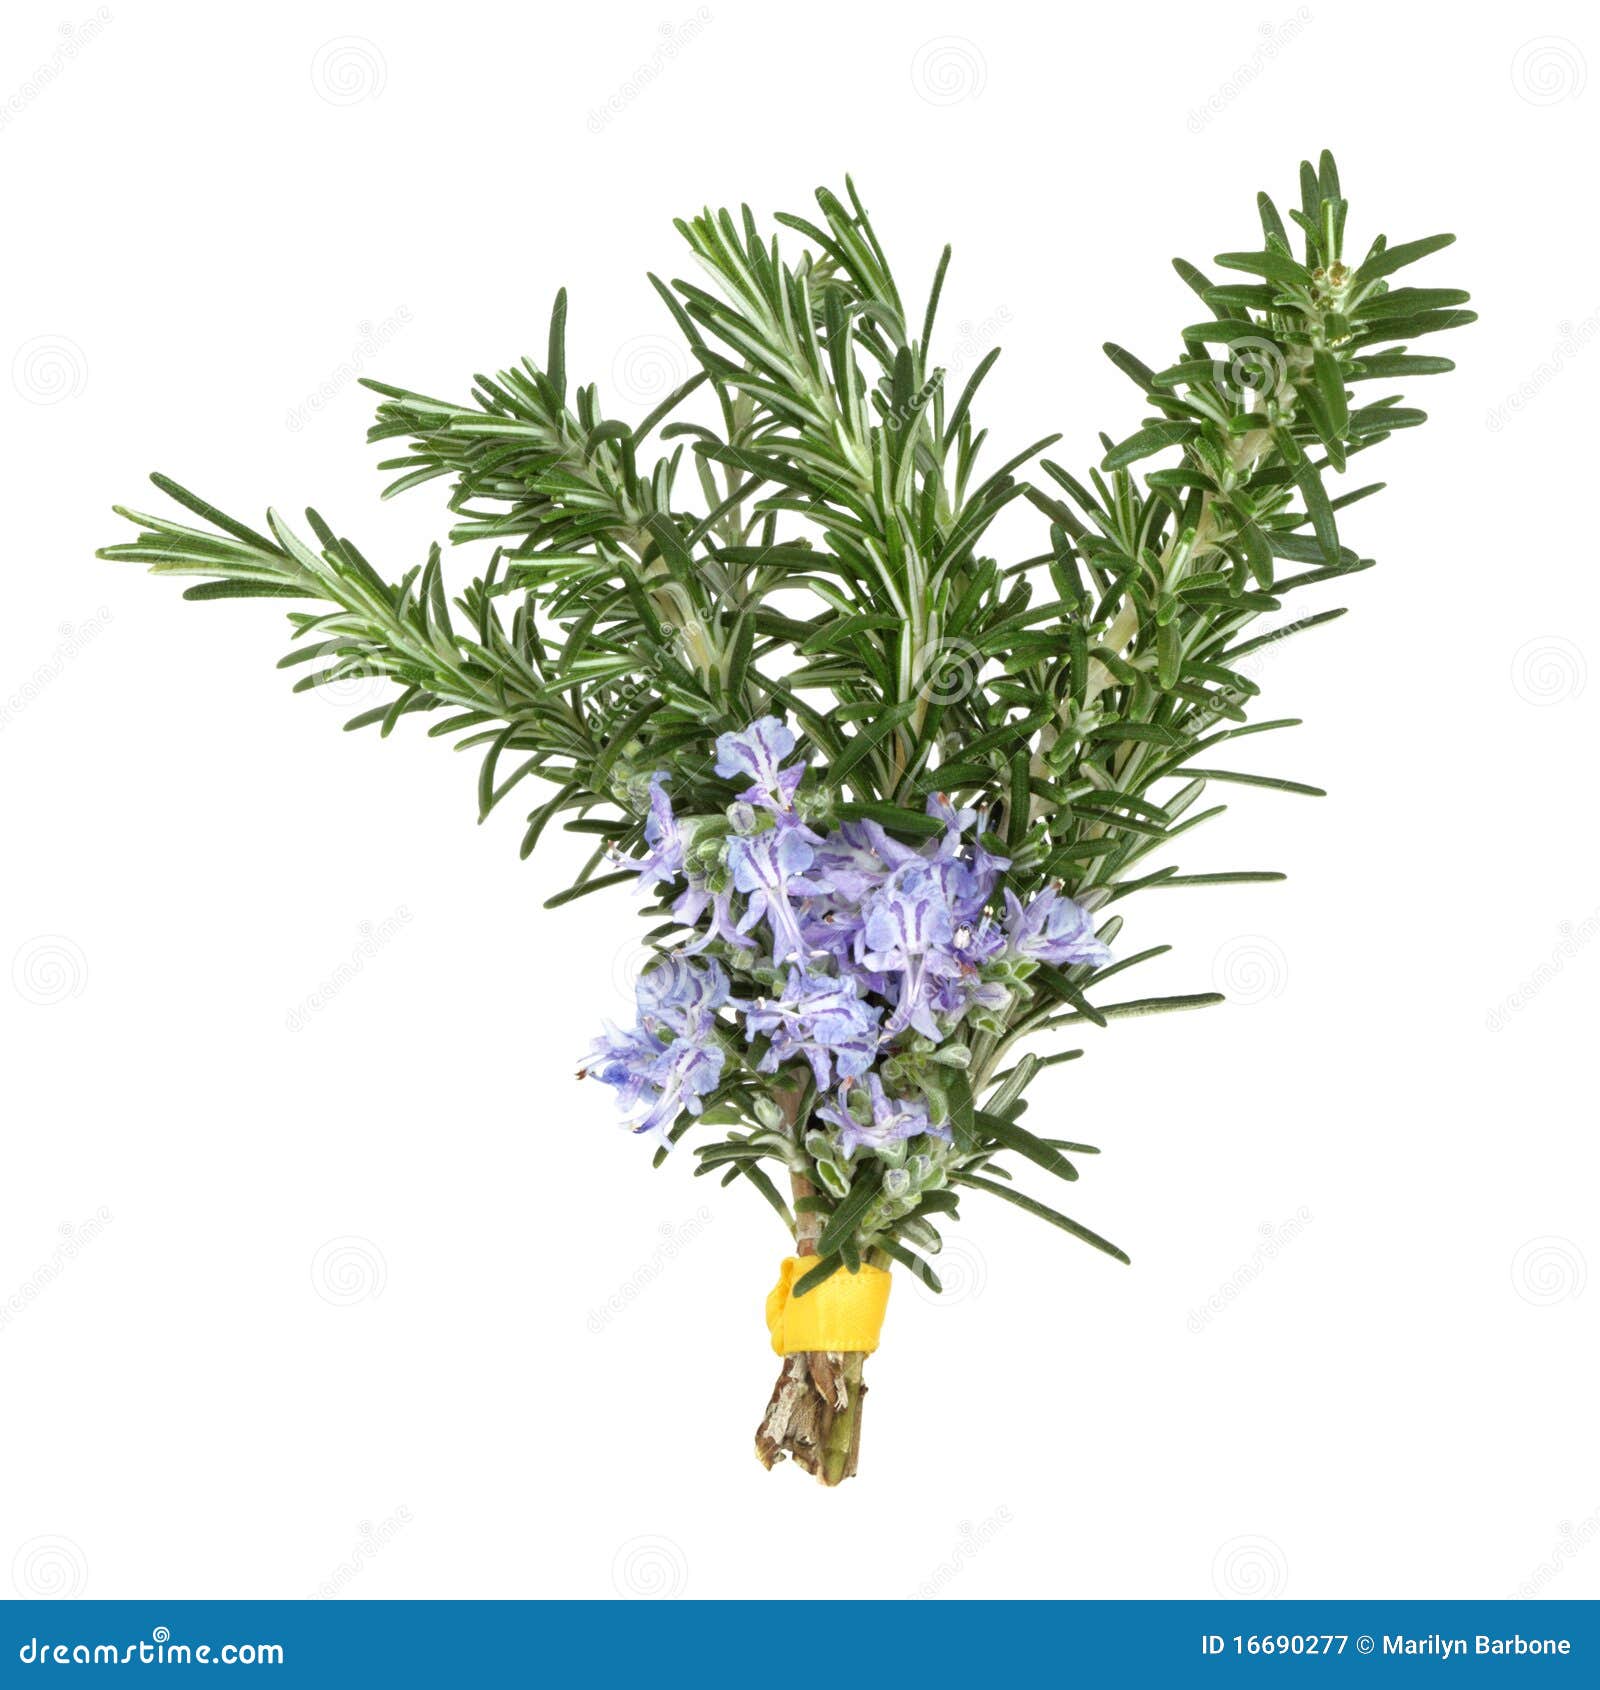 Rosemary Herb Flowers Royalty Free Stock Photography - Image: 16690277